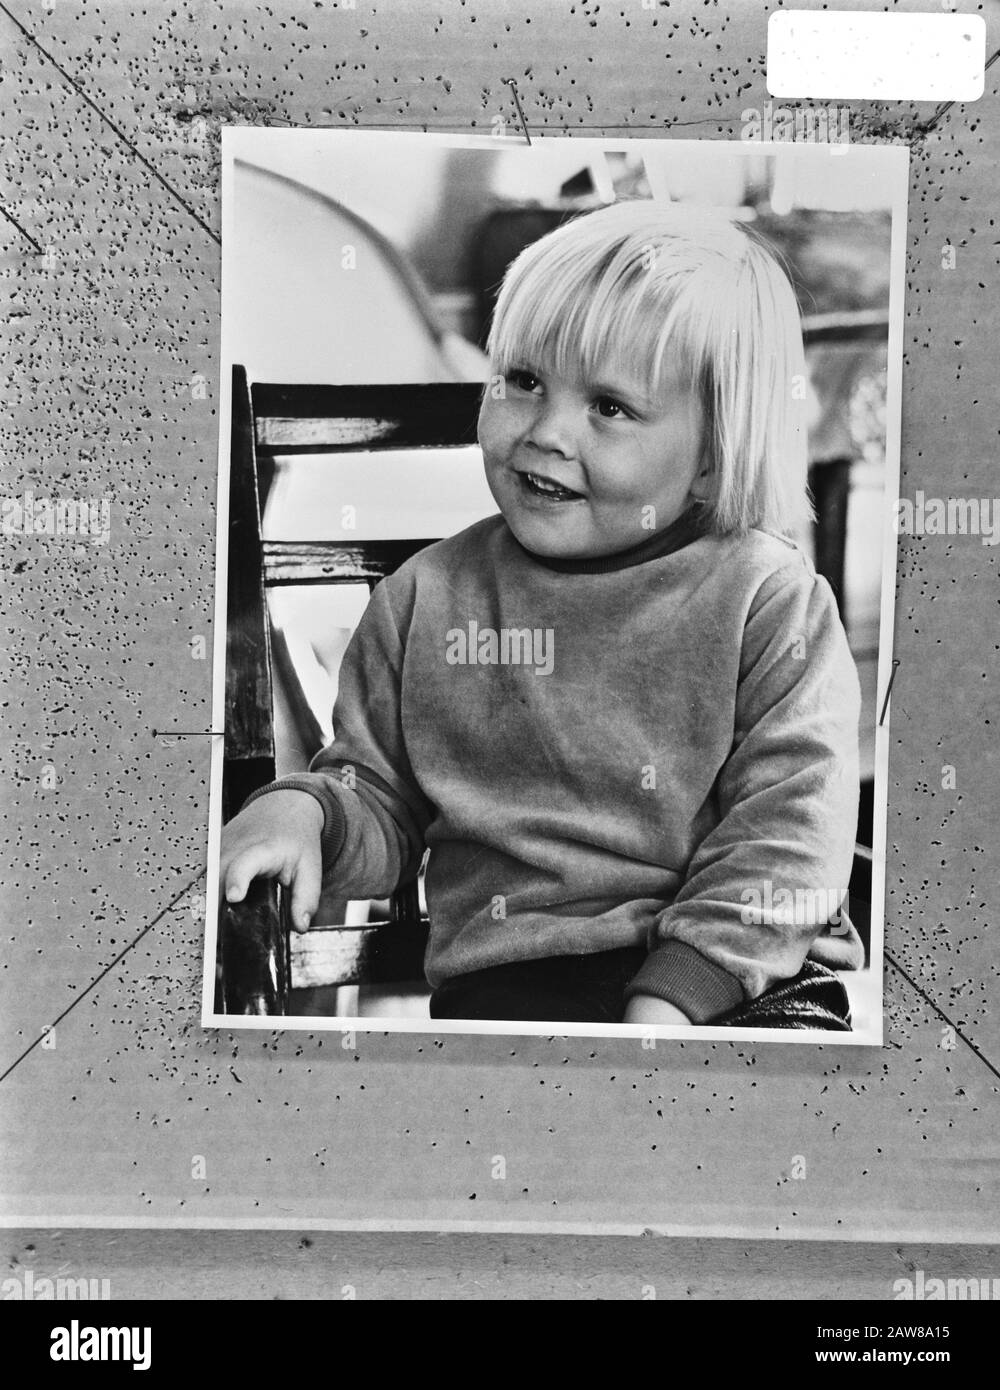 prins-willem-alexander-on-april-27-4-years-princes-portraits-willem-alexander-prince-date-april-23-1971-keywords-portraits-princes-person-name-willem-alexander-prince-prince-claus-of-the-netherlands-copyright-holder-national-archives-material-type-negative-black-white-archive-inventory-number-see-access-2240104-2AW8A15.jpg